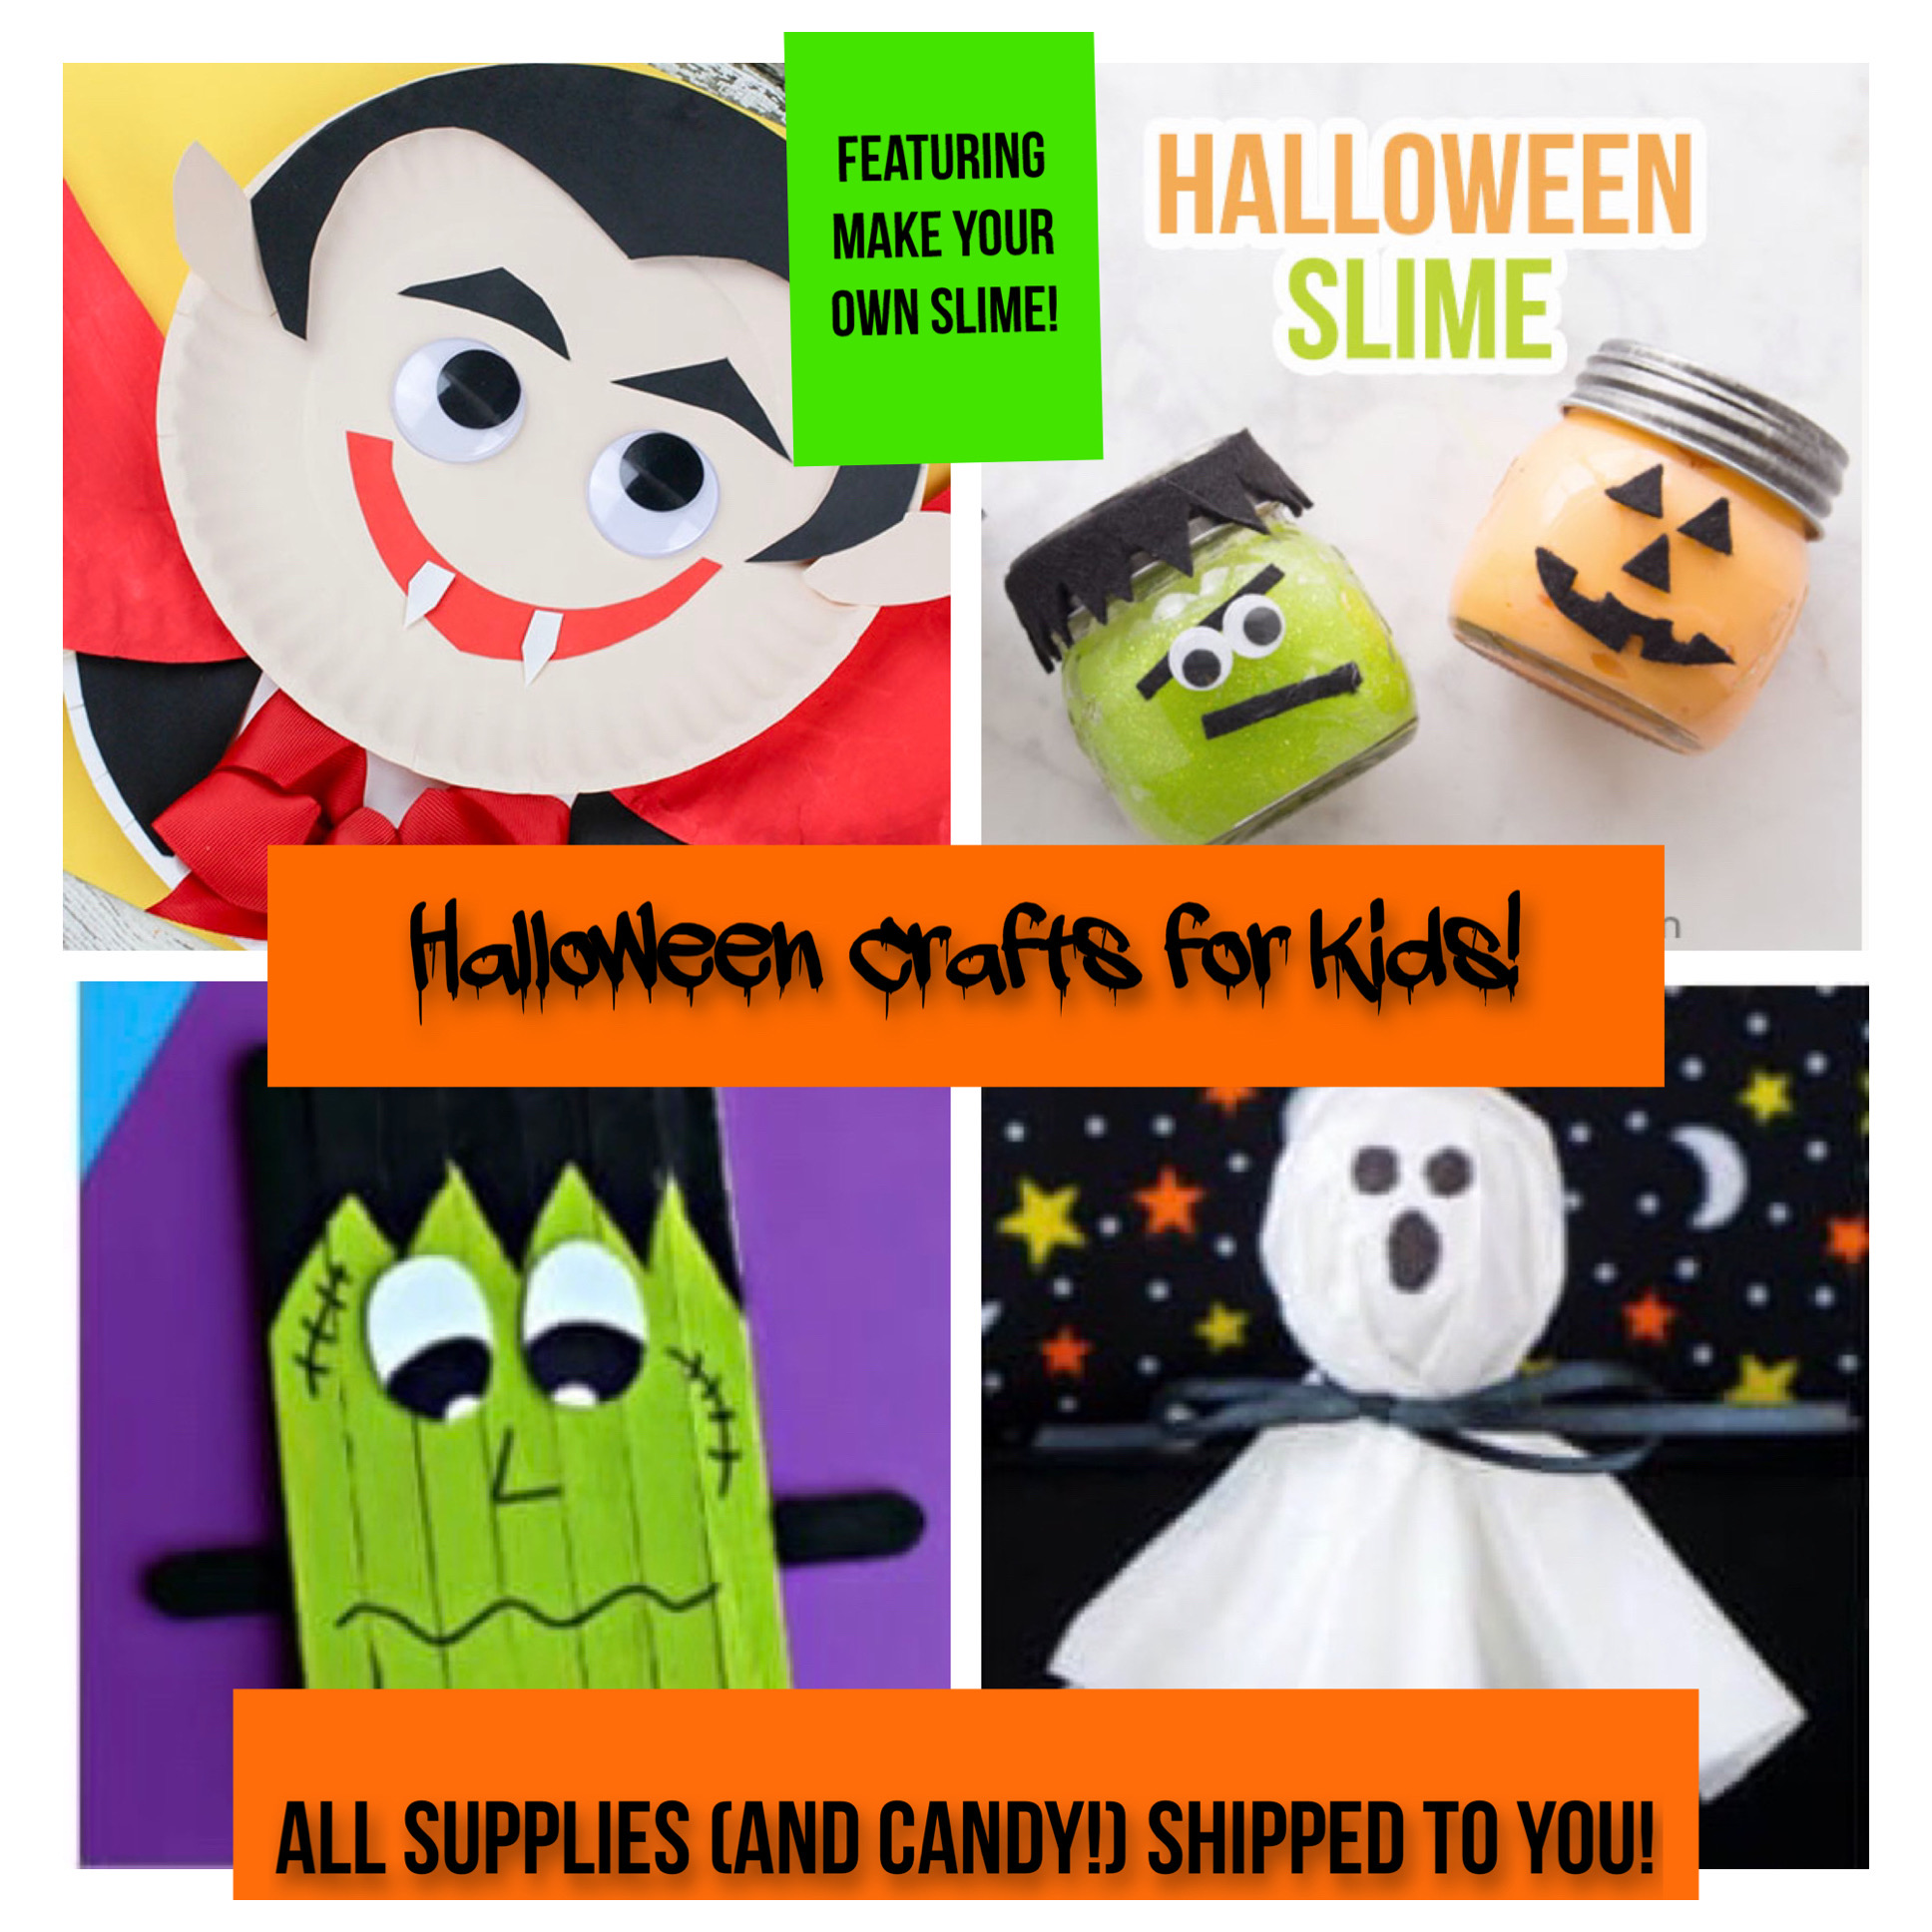 A Halloween Crafts4Kids  Supplies Shipped to You experience project by Yaymaker